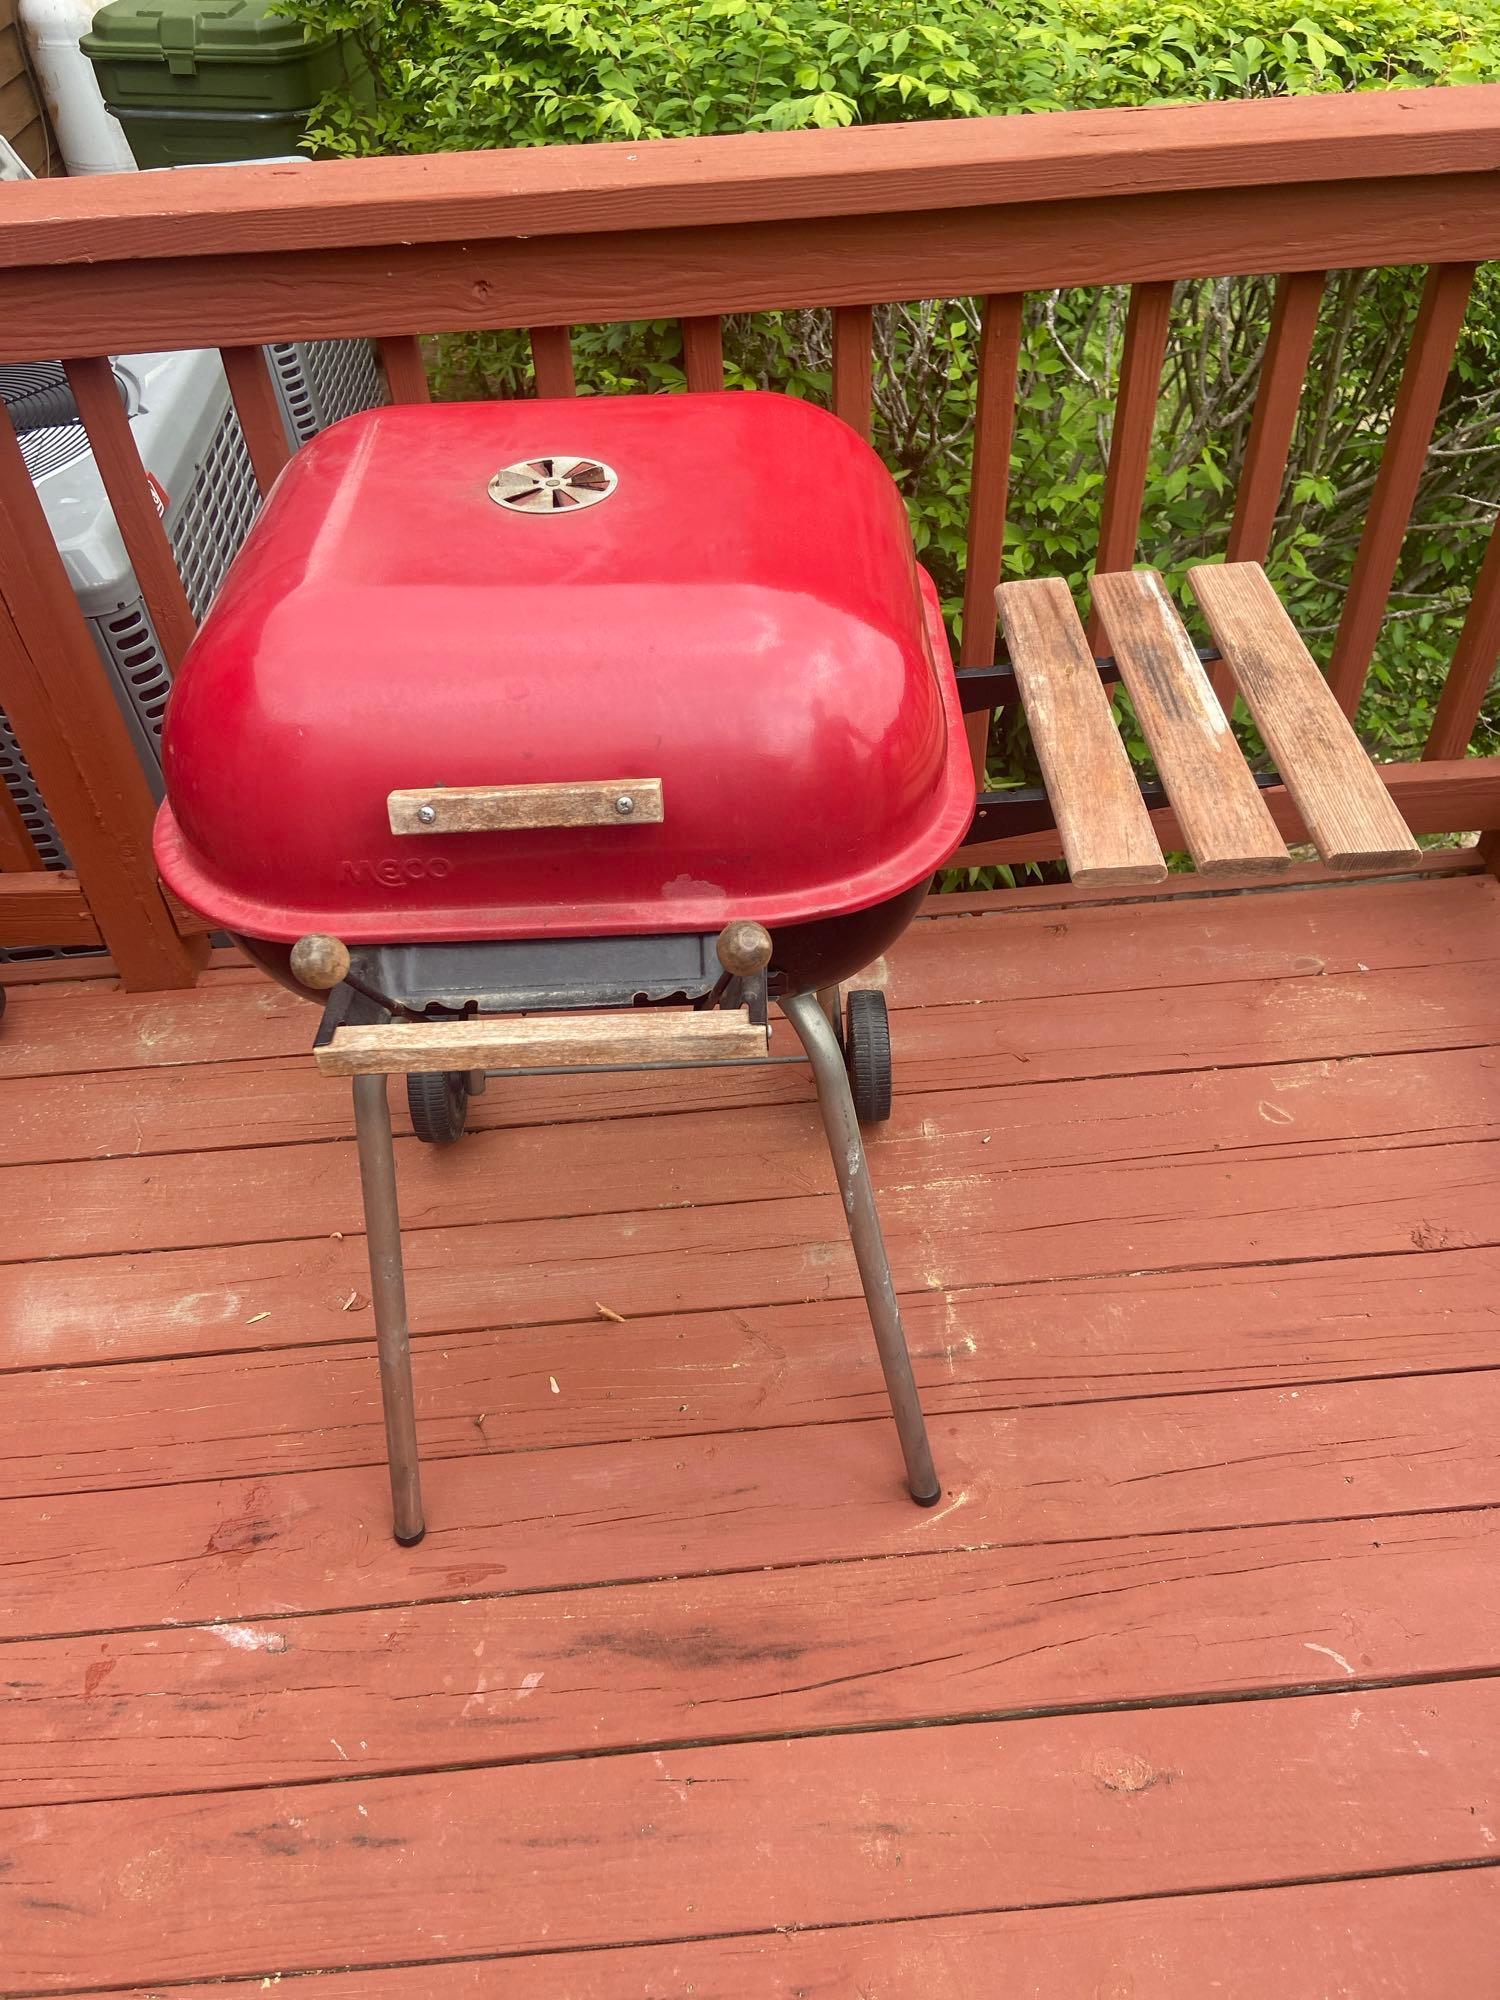 2 Grills $20 STS